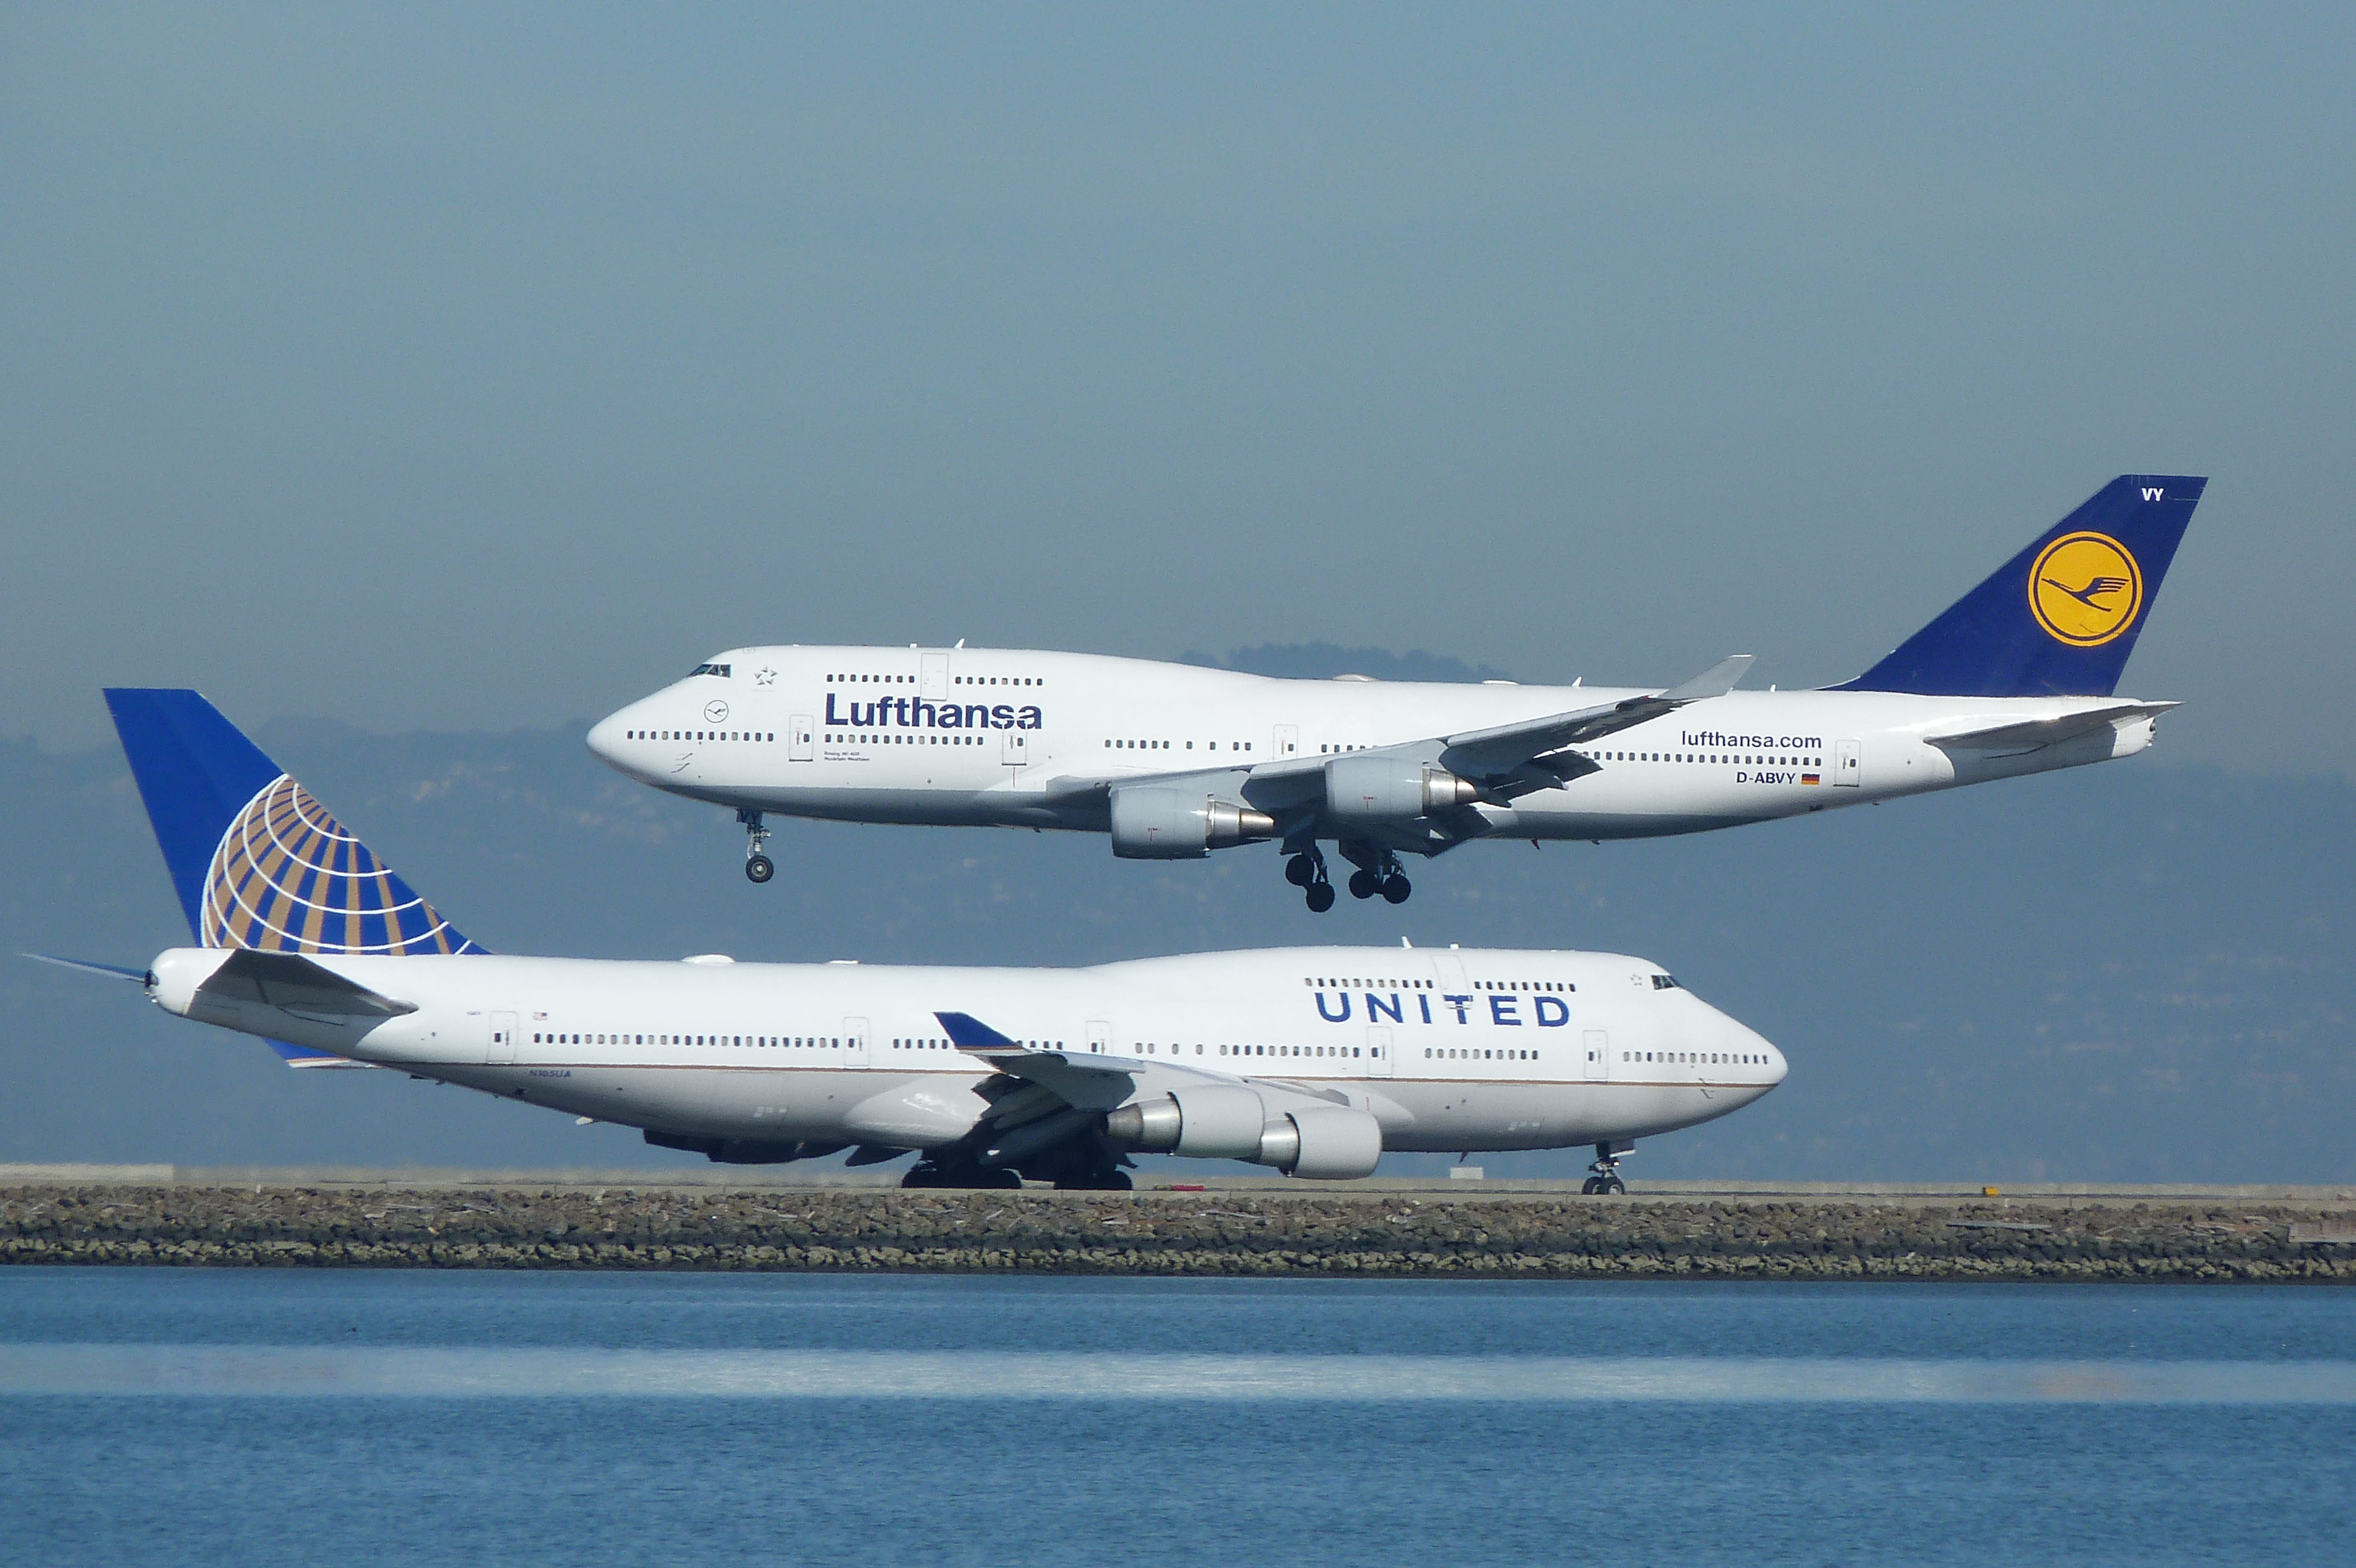 two-passenger-planes-simultaneously-land-on-runway-just-meters-apart